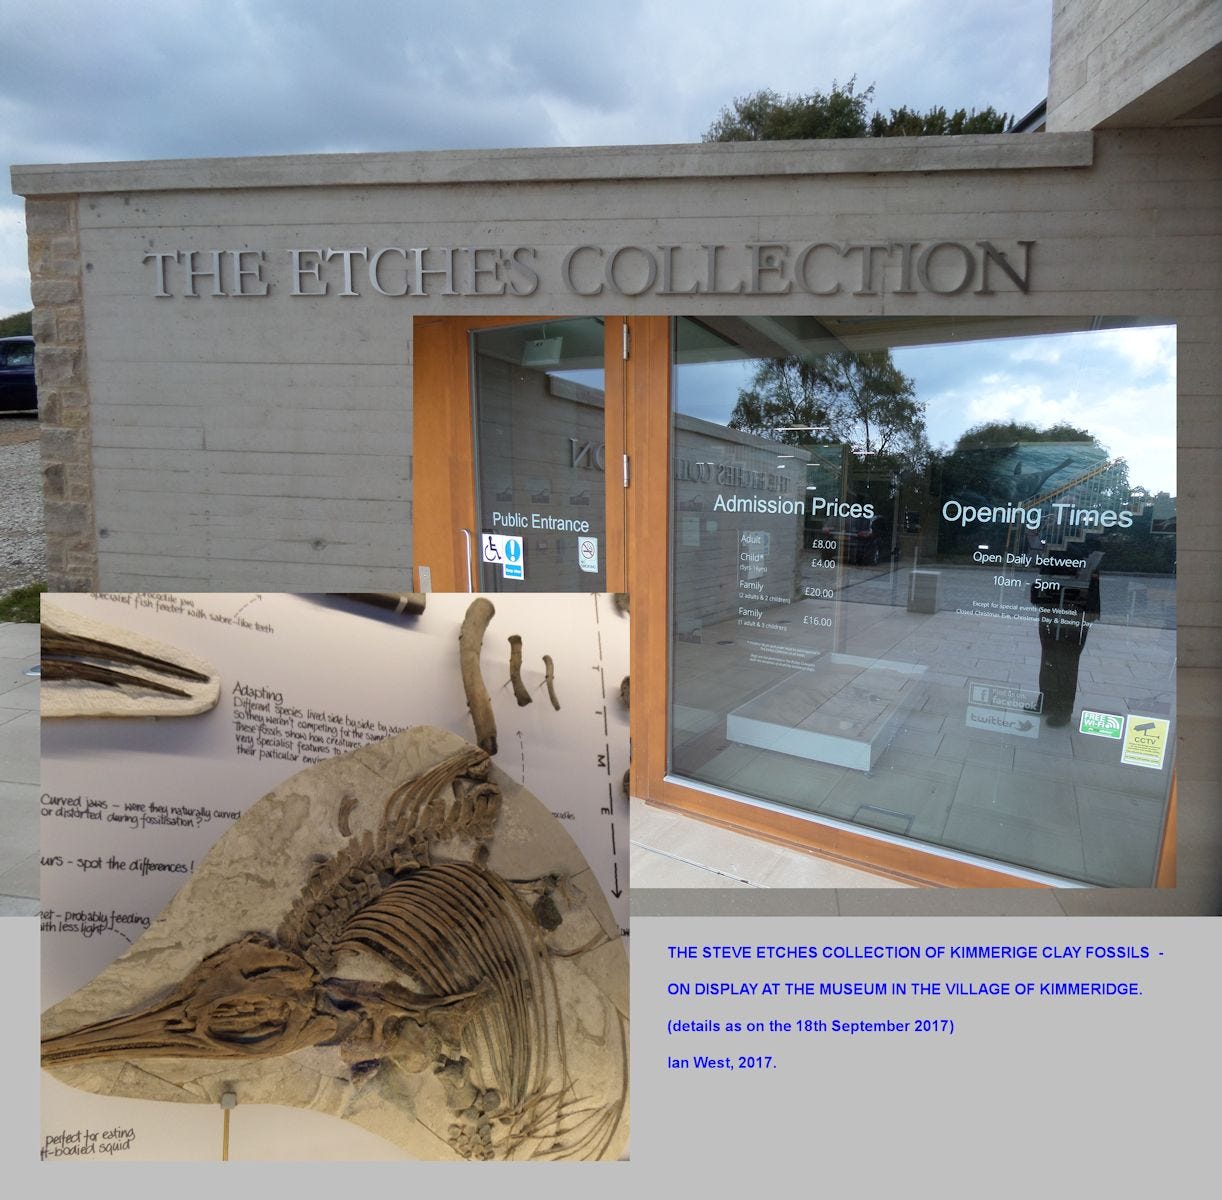 The Steve Etches Museum, Kimmeridge, Dorset, with many remains of Ichthyosaurs and other fossil, collected by Steve Etches from the Kimmeridge Clay Formation